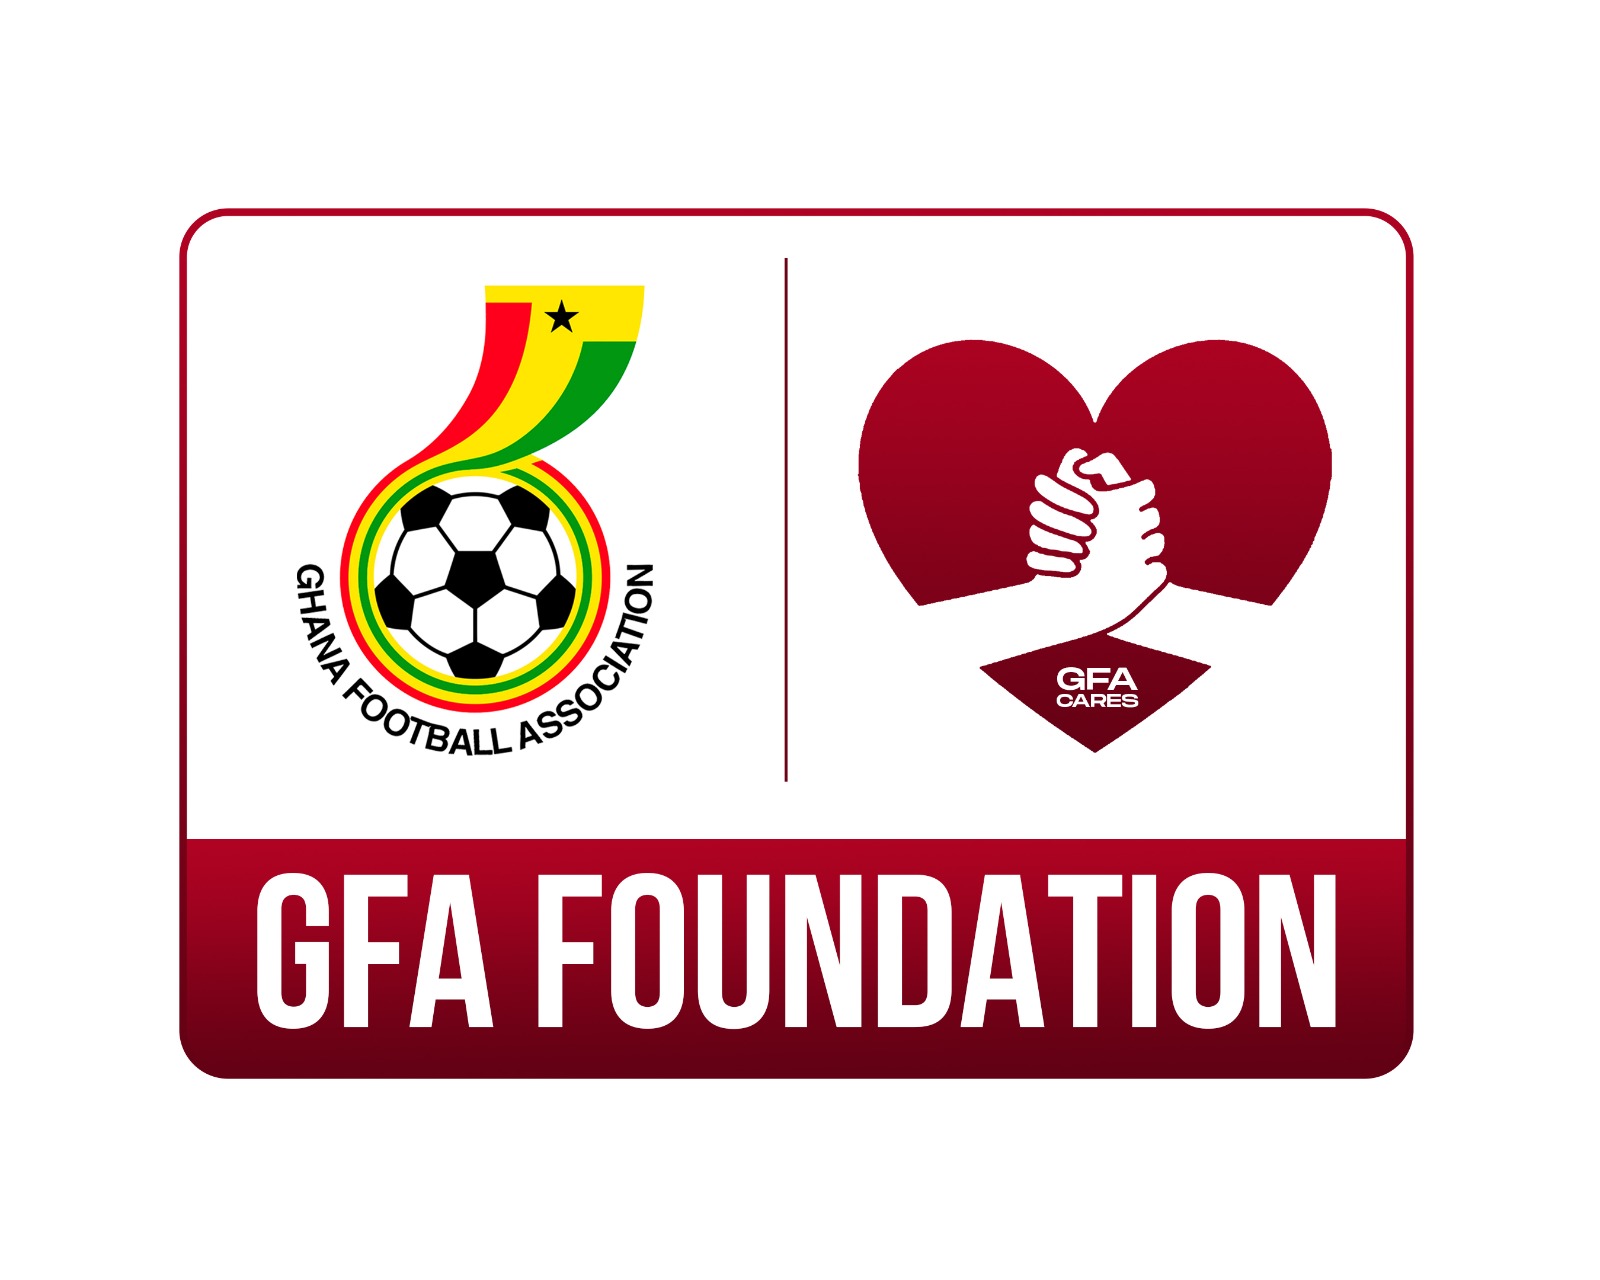 GFA donates to clubs and Dam spillage communities